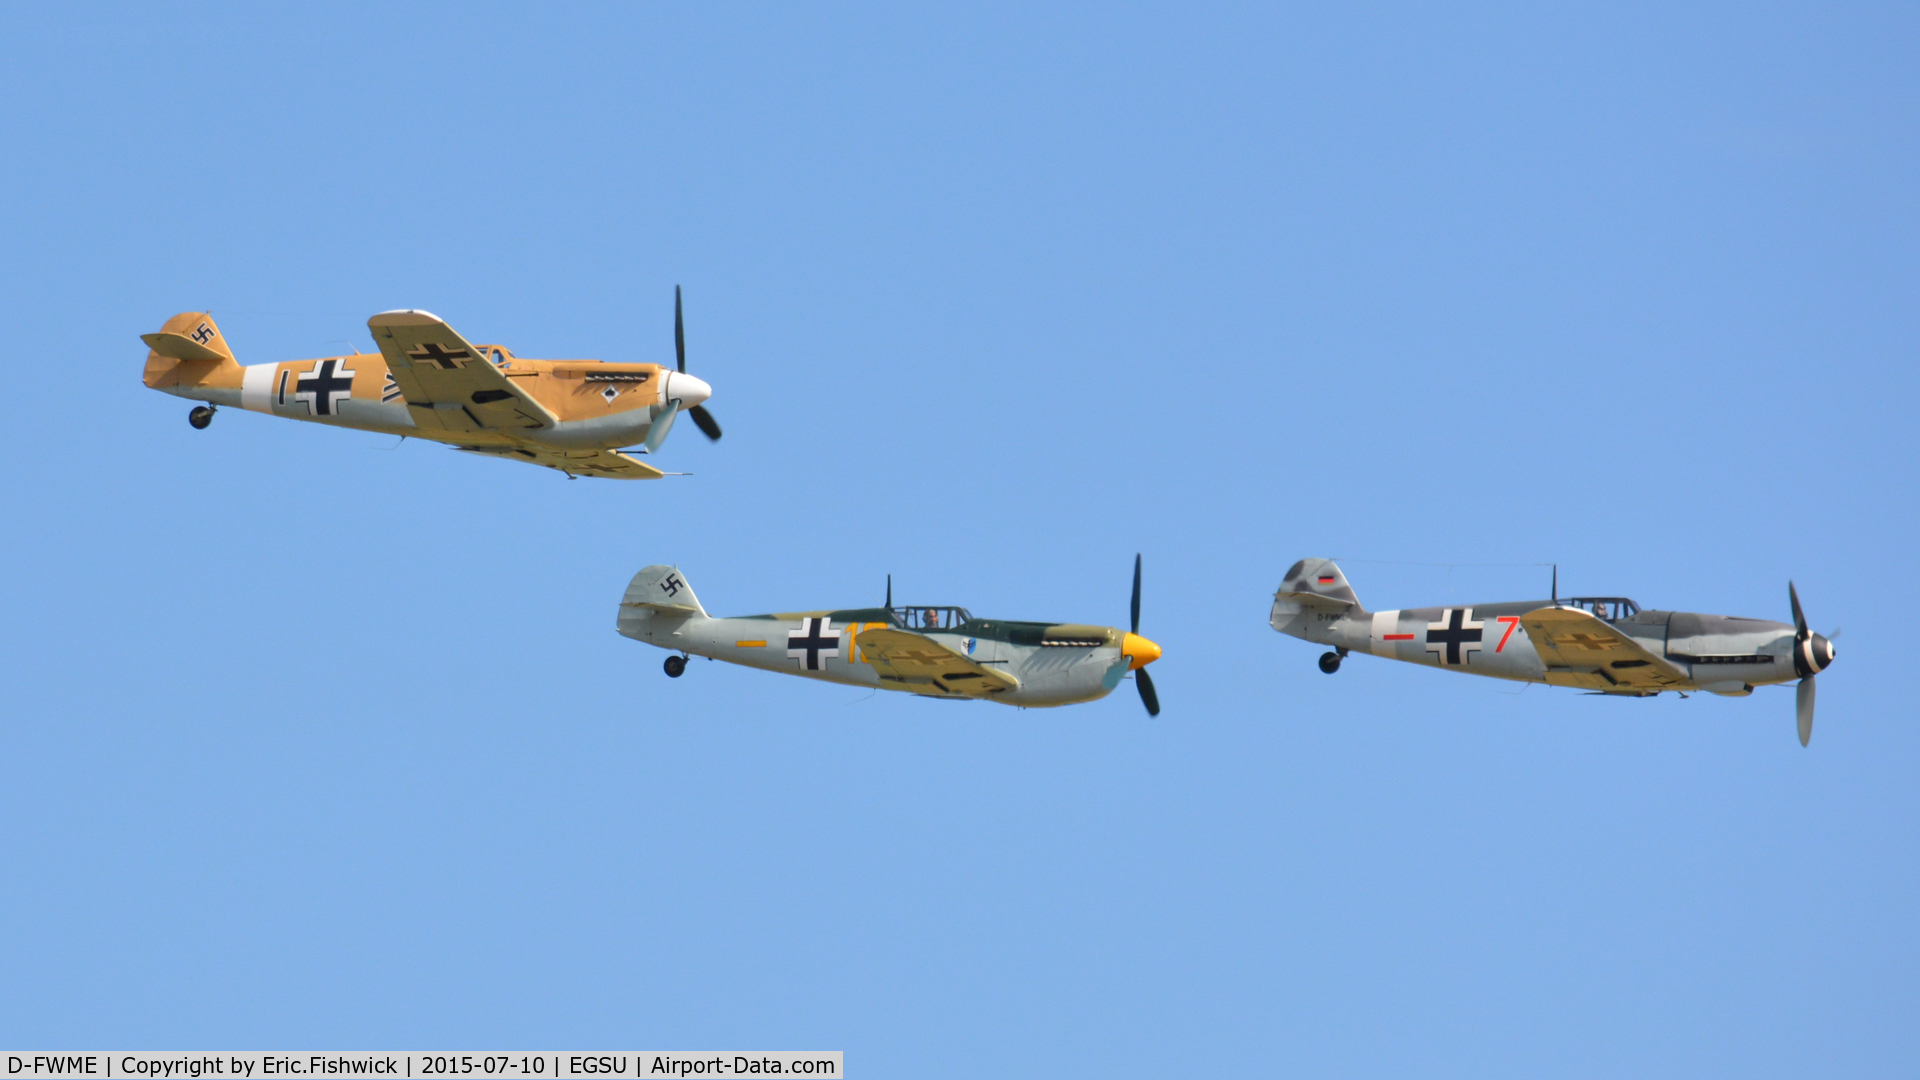 D-FWME, Messerschmitt Bf-109G-4 C/N 0139, 45. Bf-109 leading two Buchons on the eve of Flying Legends Air Show, Duxford - July 2015.